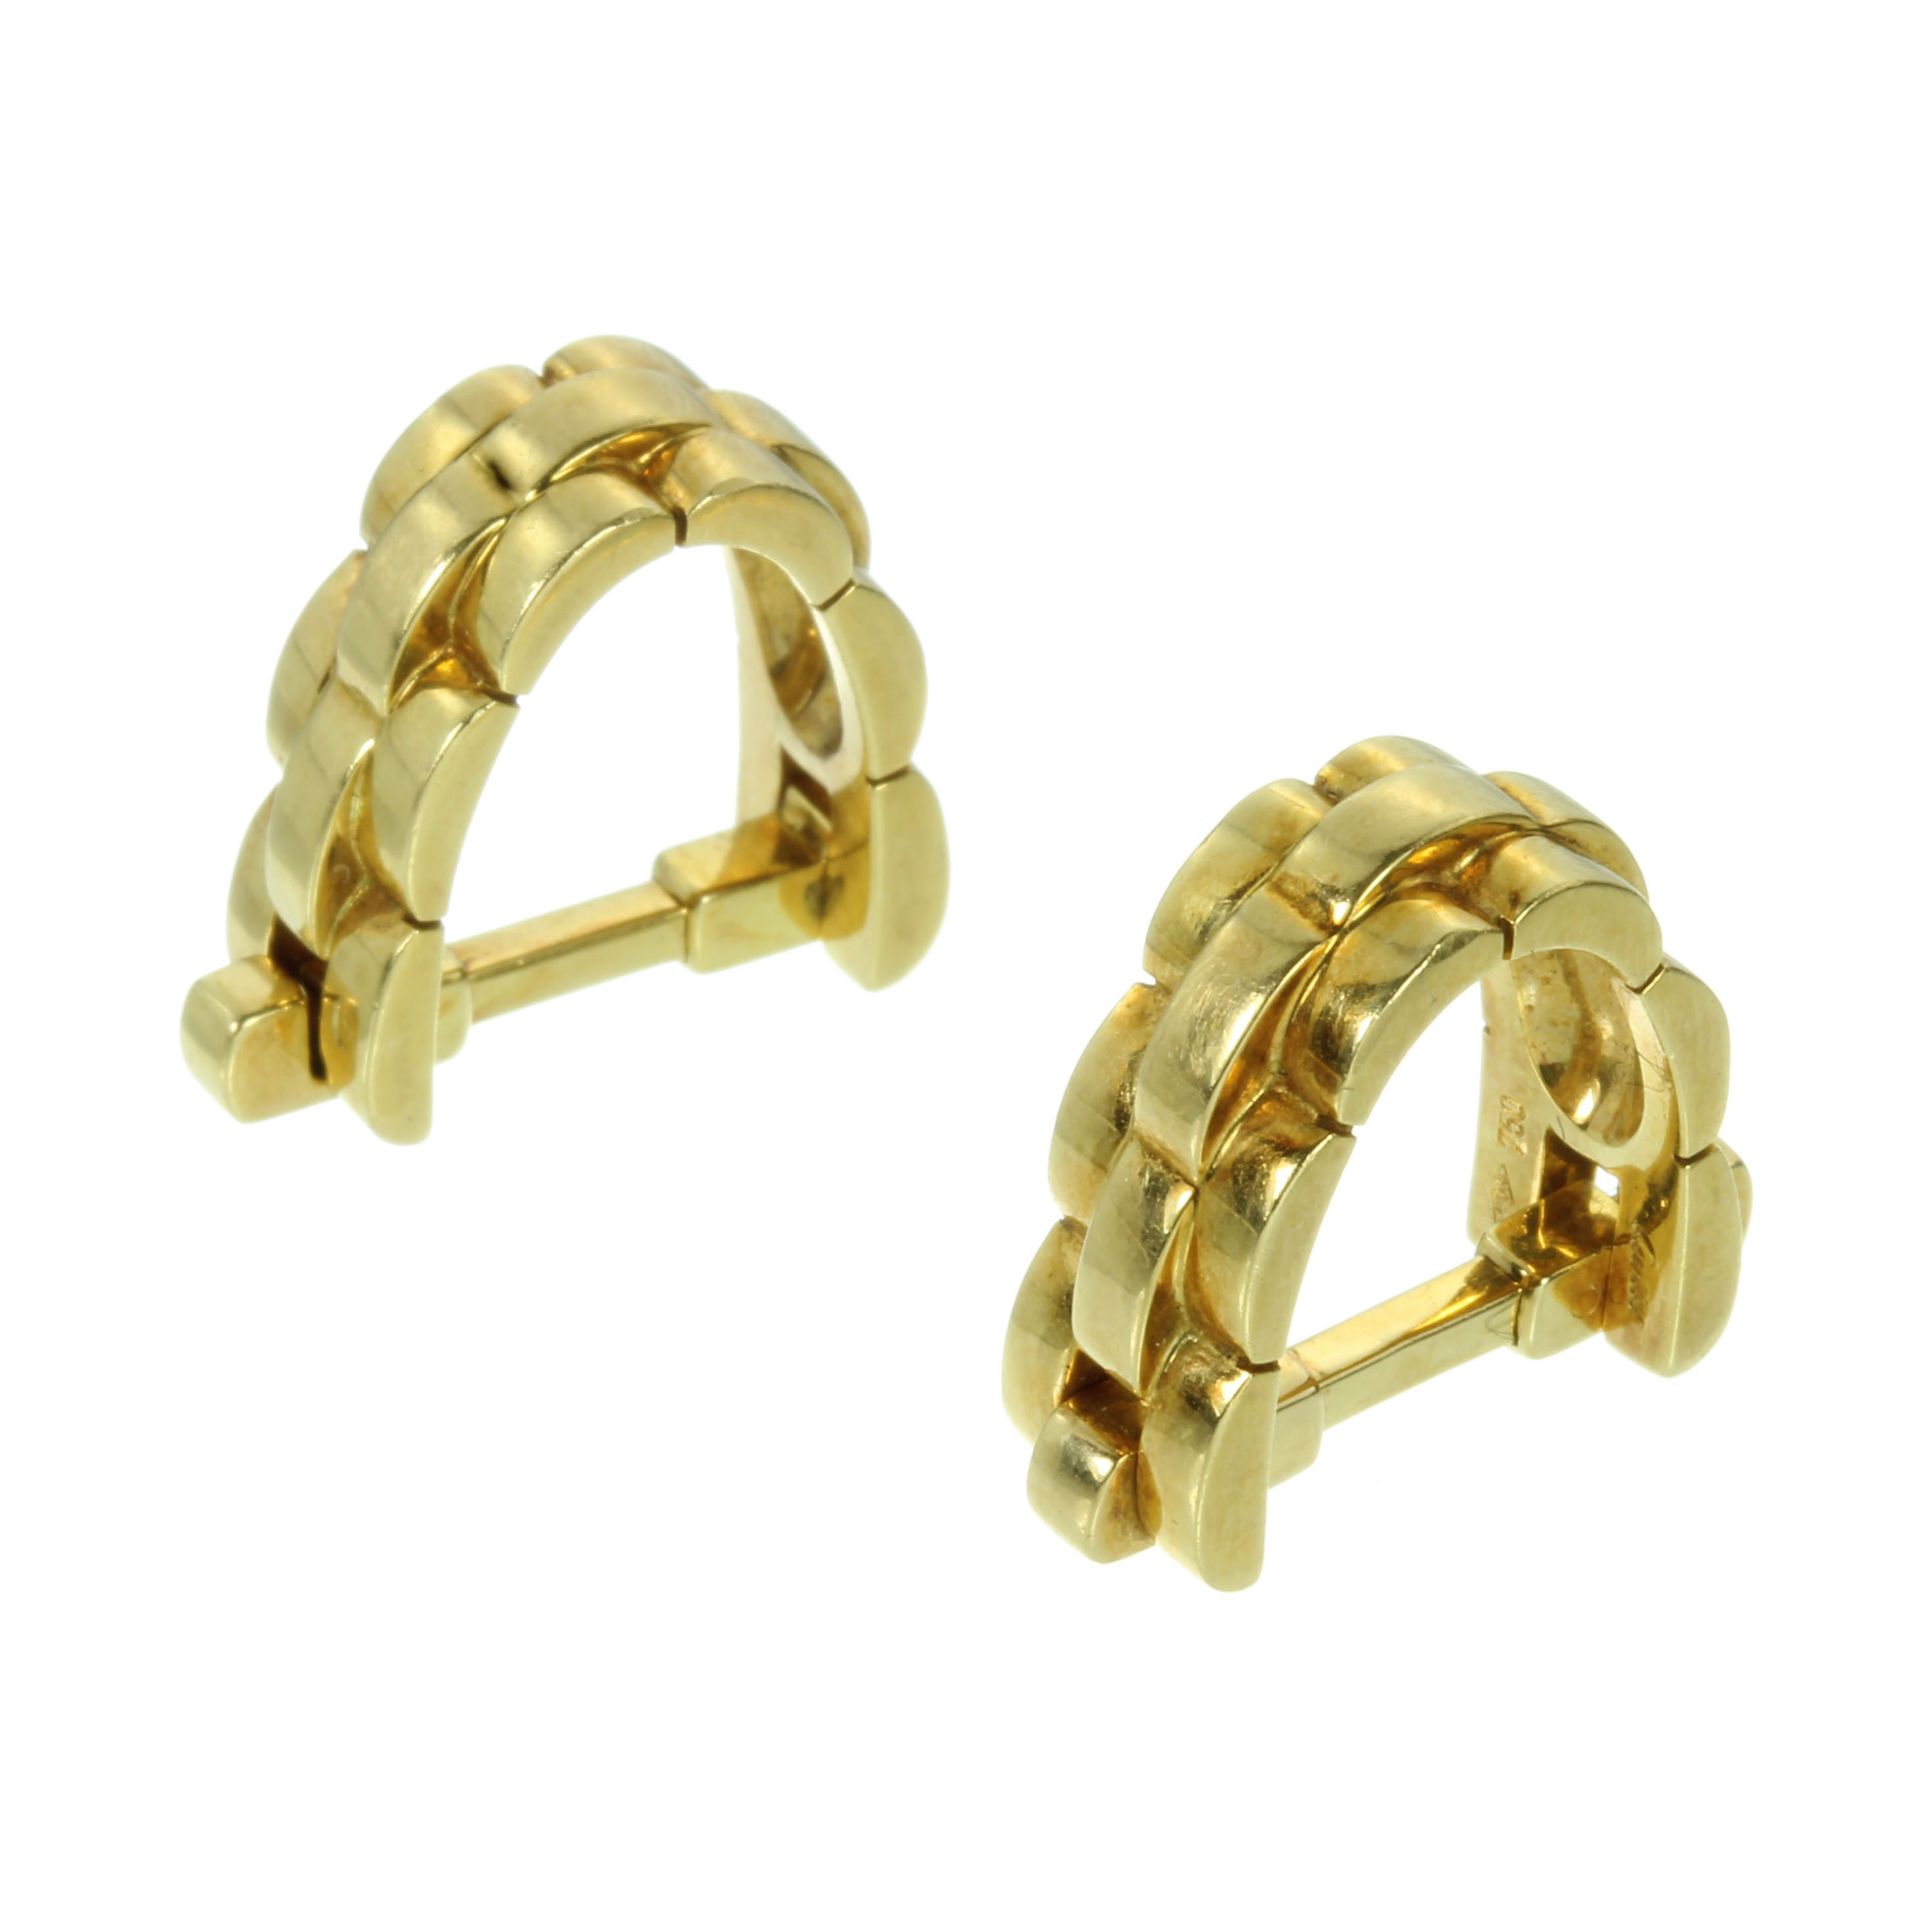 A PAIR OF VINTAGE MAILLON CUFFLINKS BY CARTIER in 18ct yellow gold, each designed as a gold link